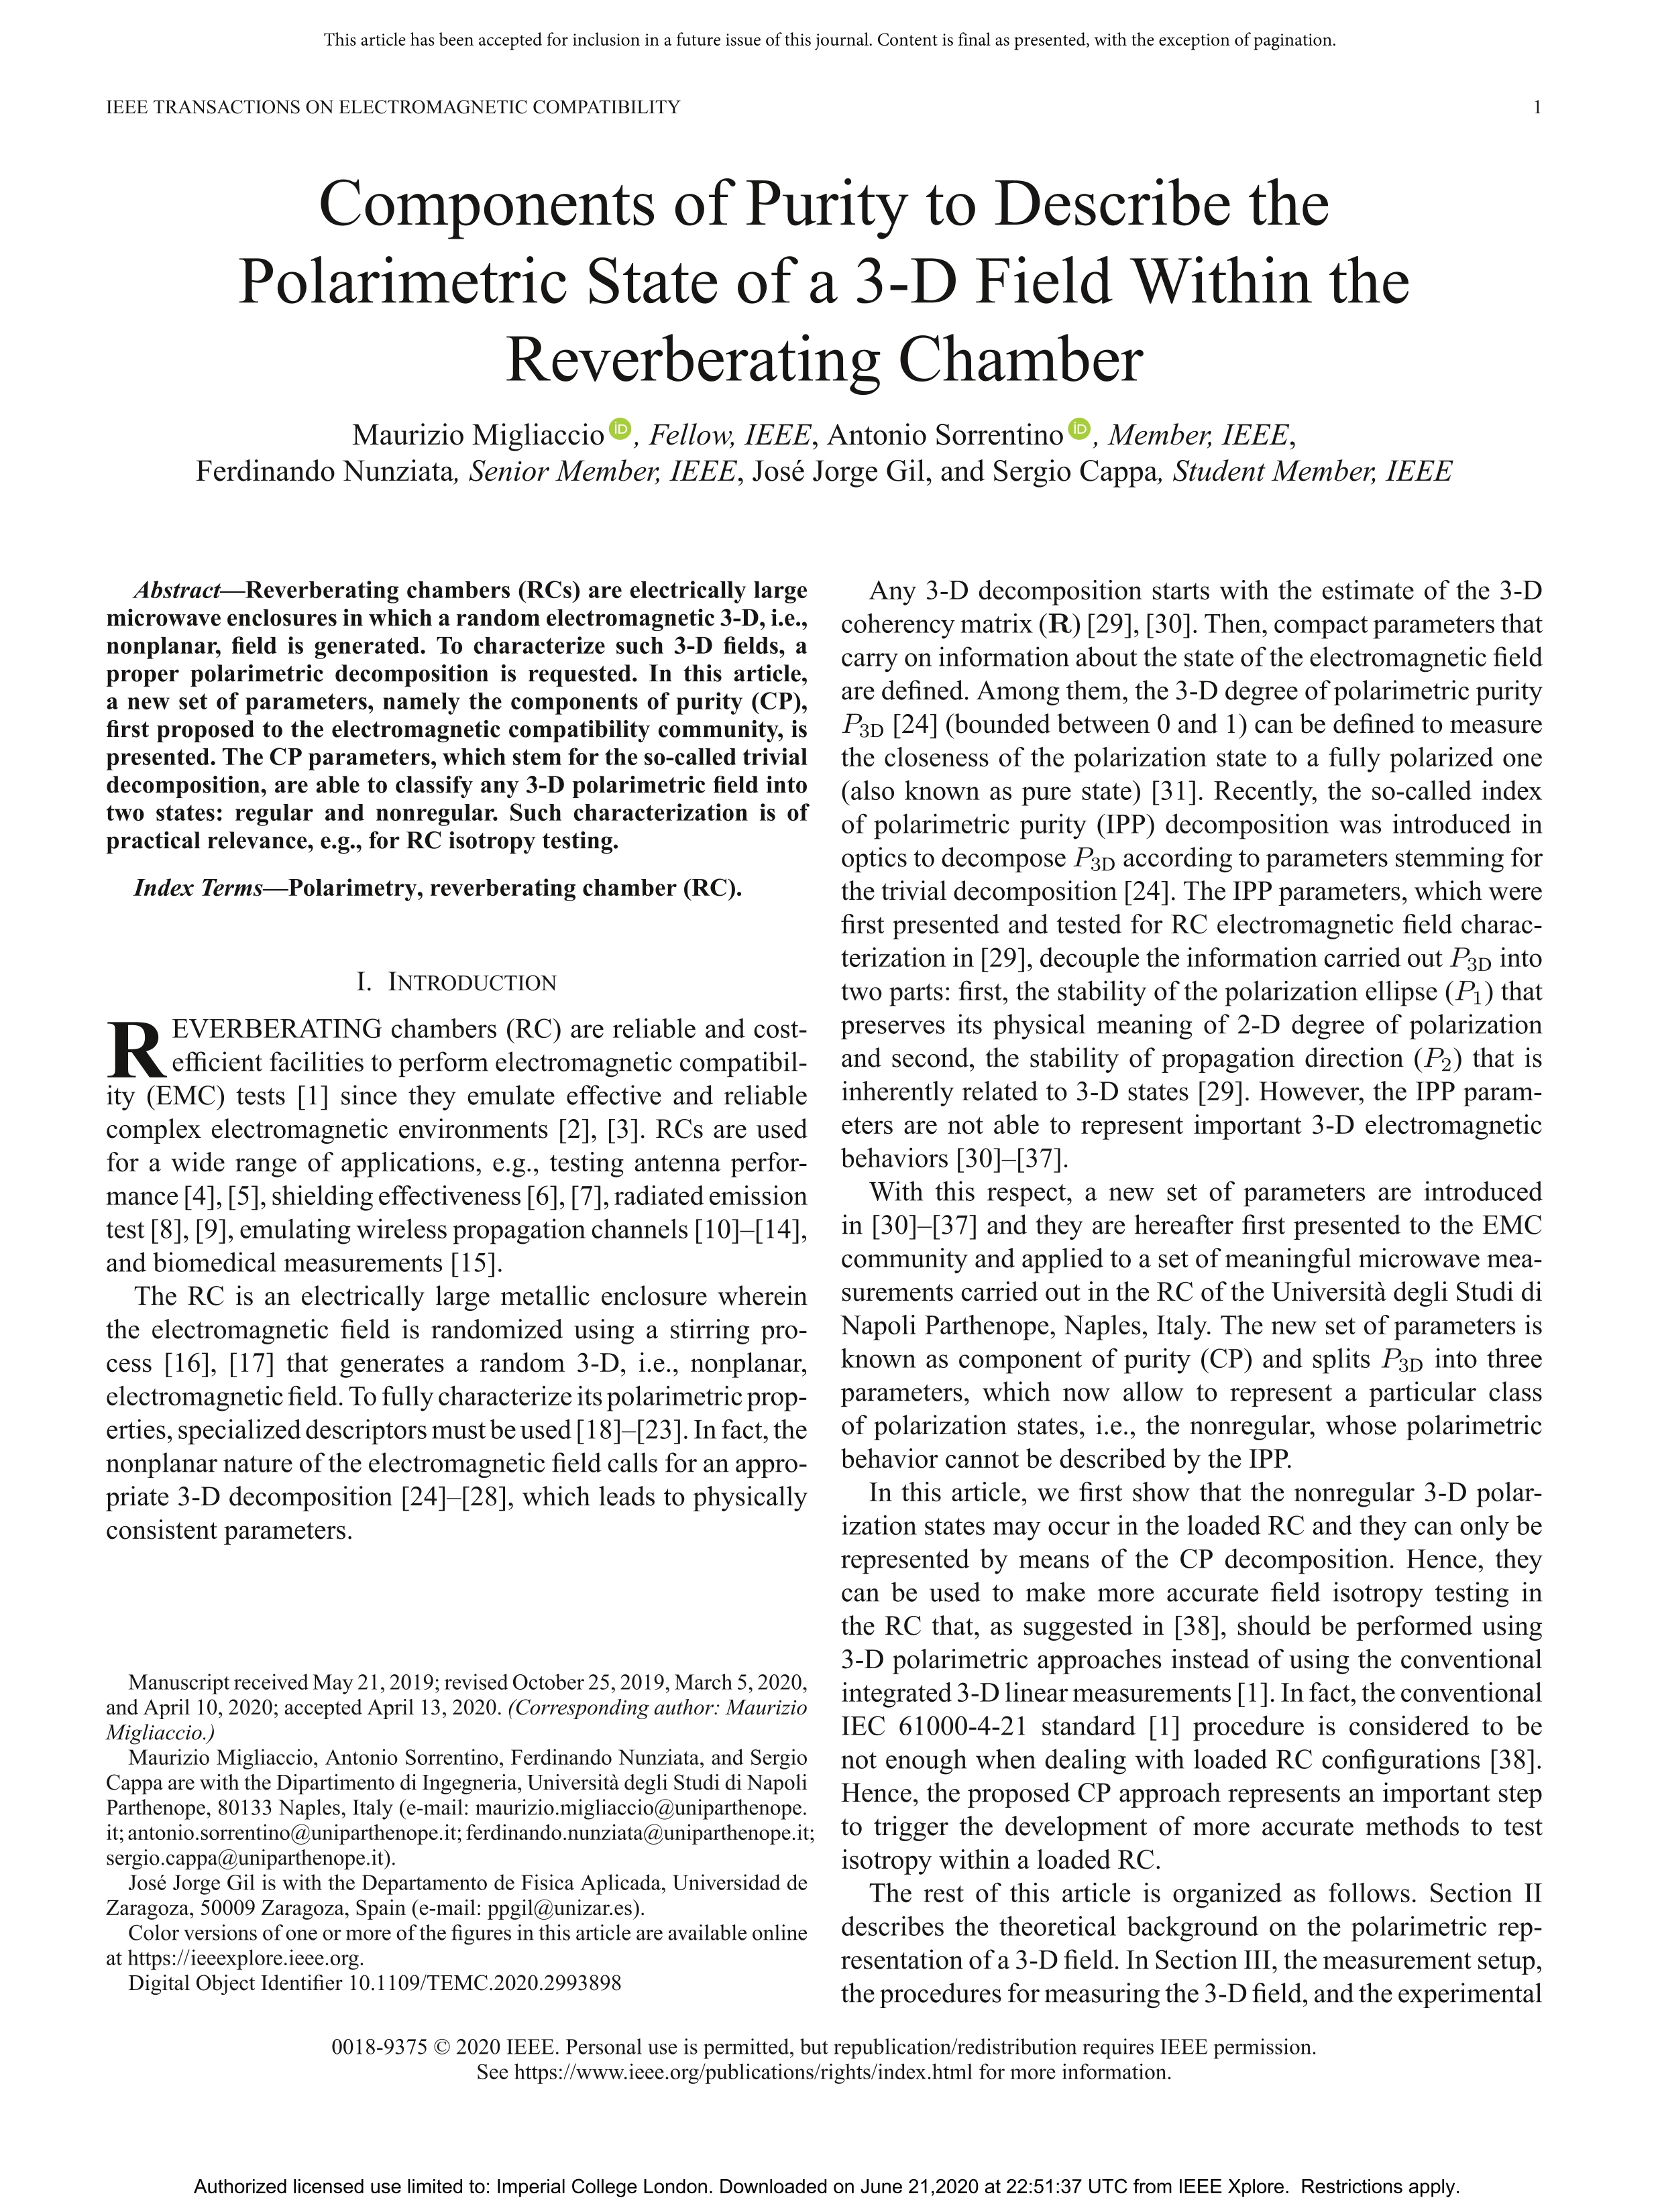 Components of Purity to Describe the Polarimetric State of a 3-D Field Within the Reverberating Chamber